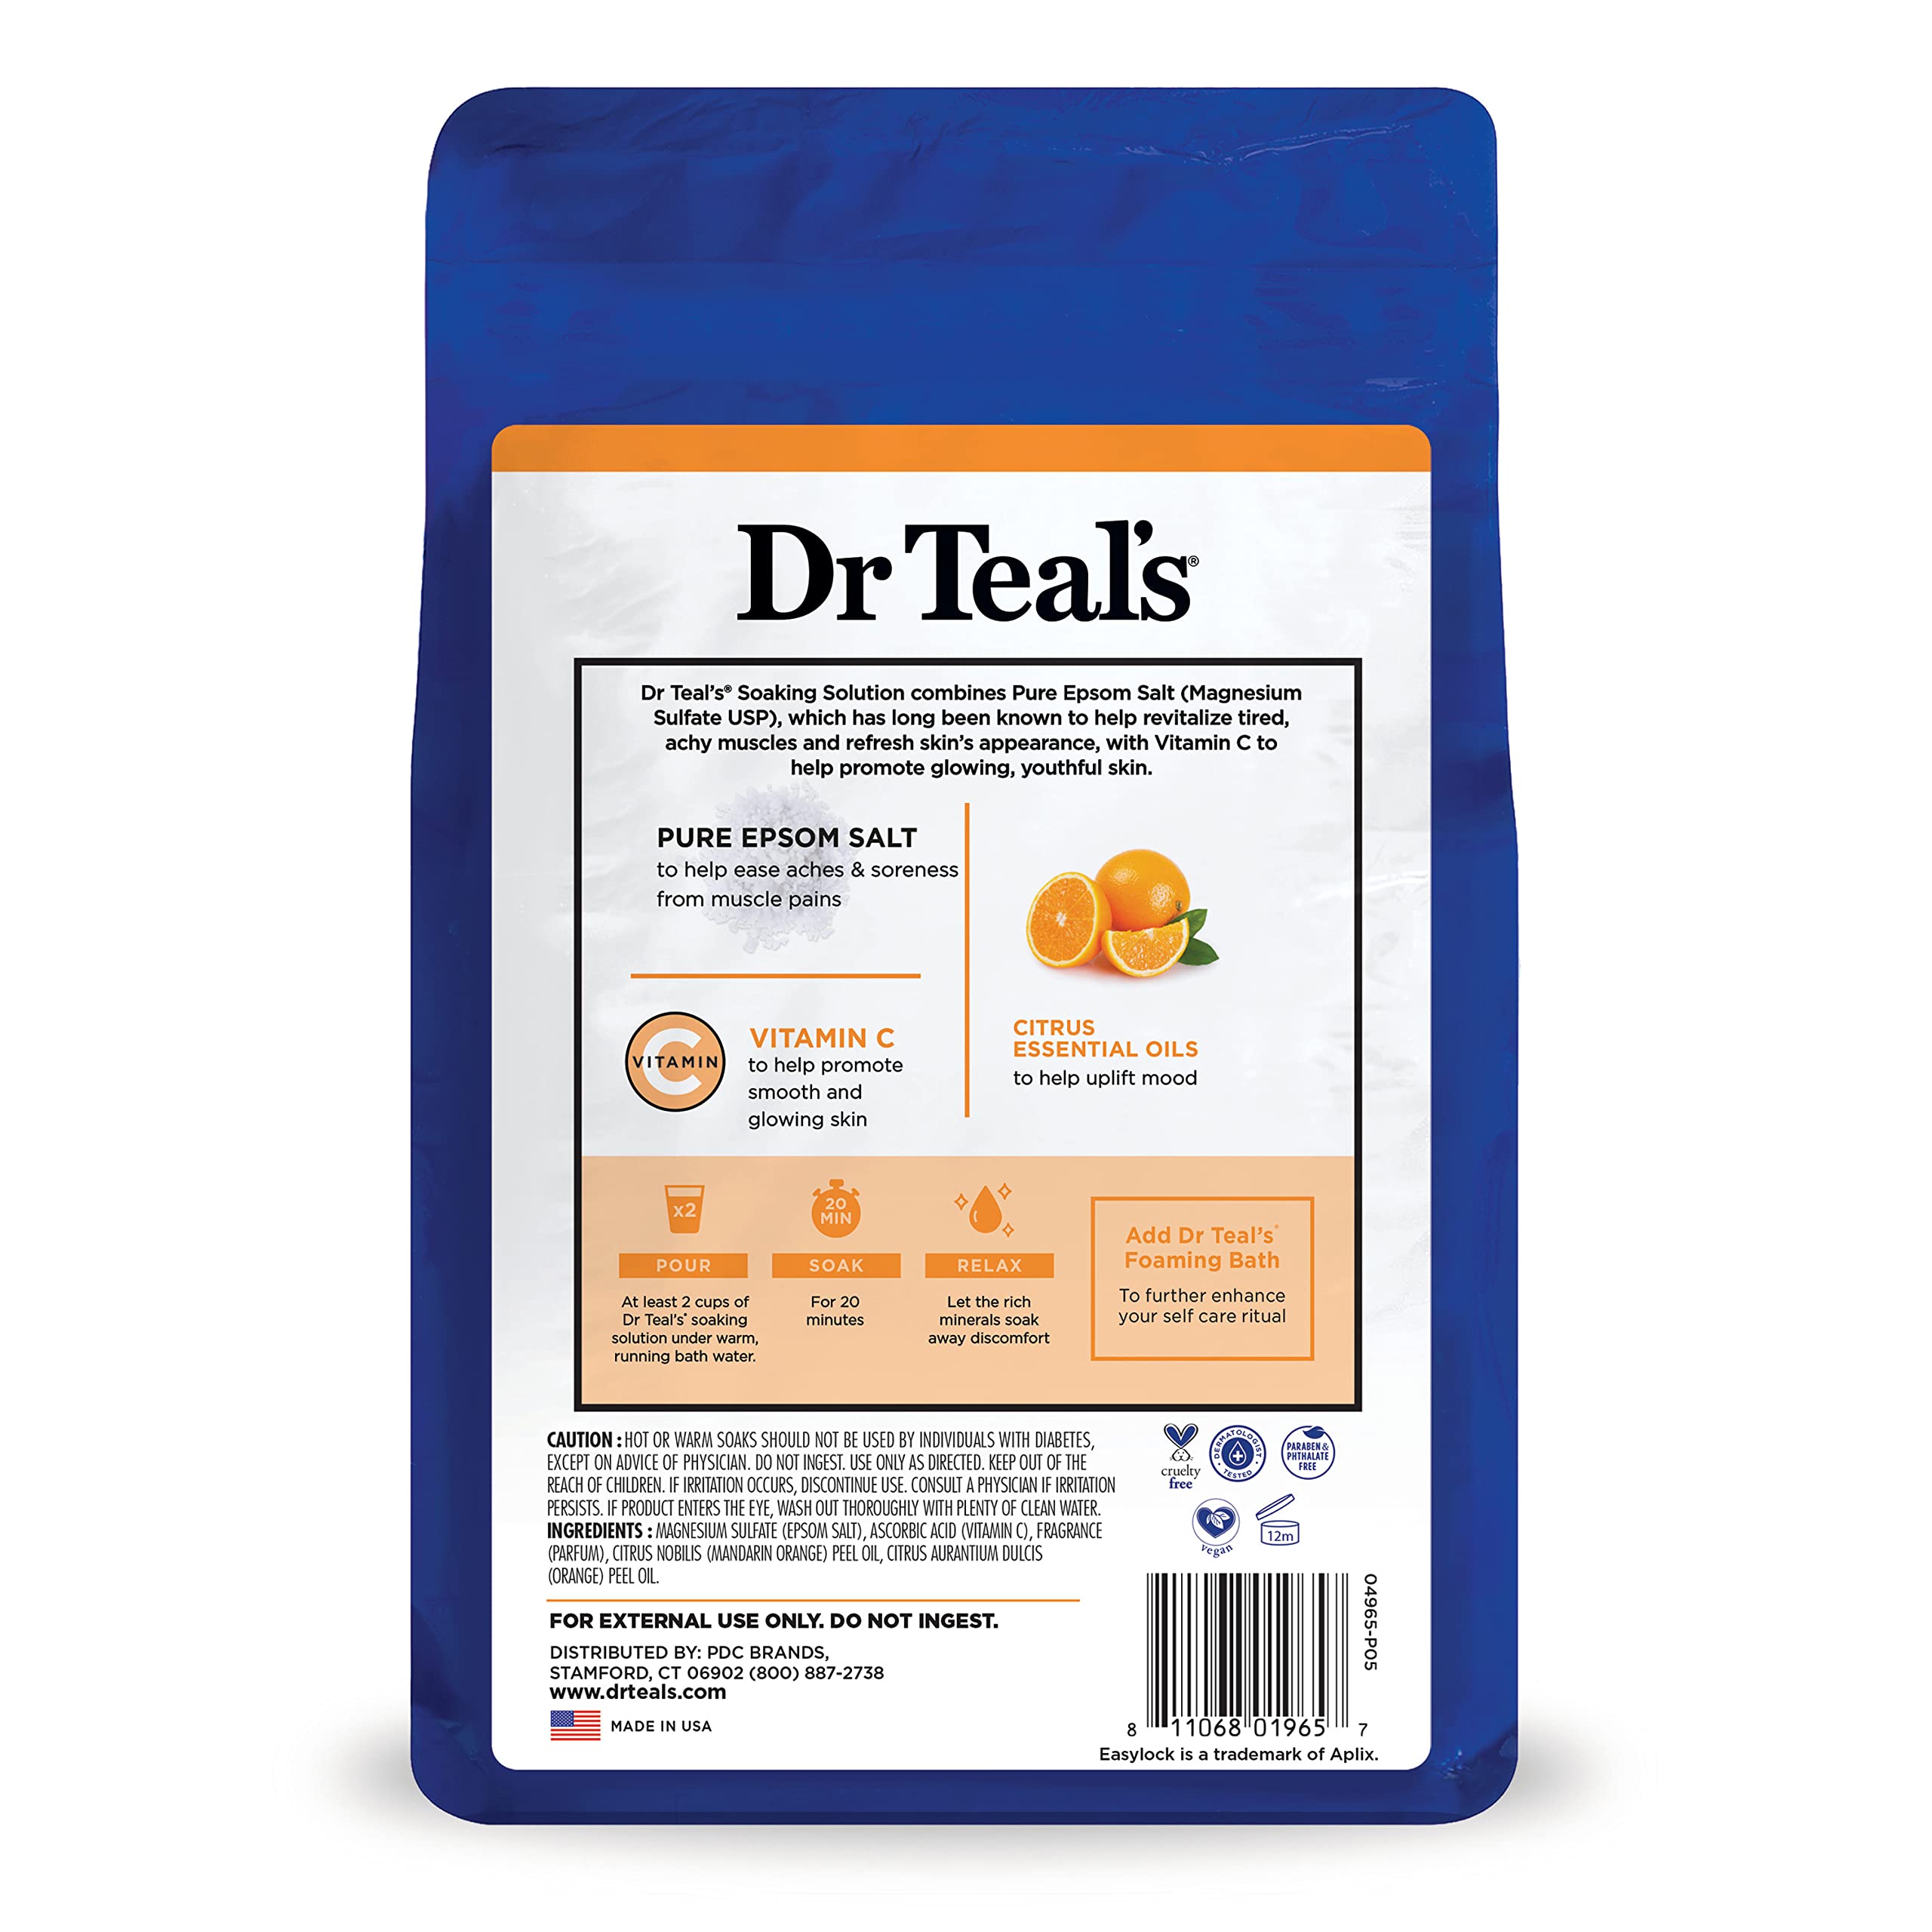 Dr Teal's Pure Epsom Salt Soak, Glow & Radiance with Vitamin C & Citrus Essential Oils, 3 lbs (Packaging May Vary)